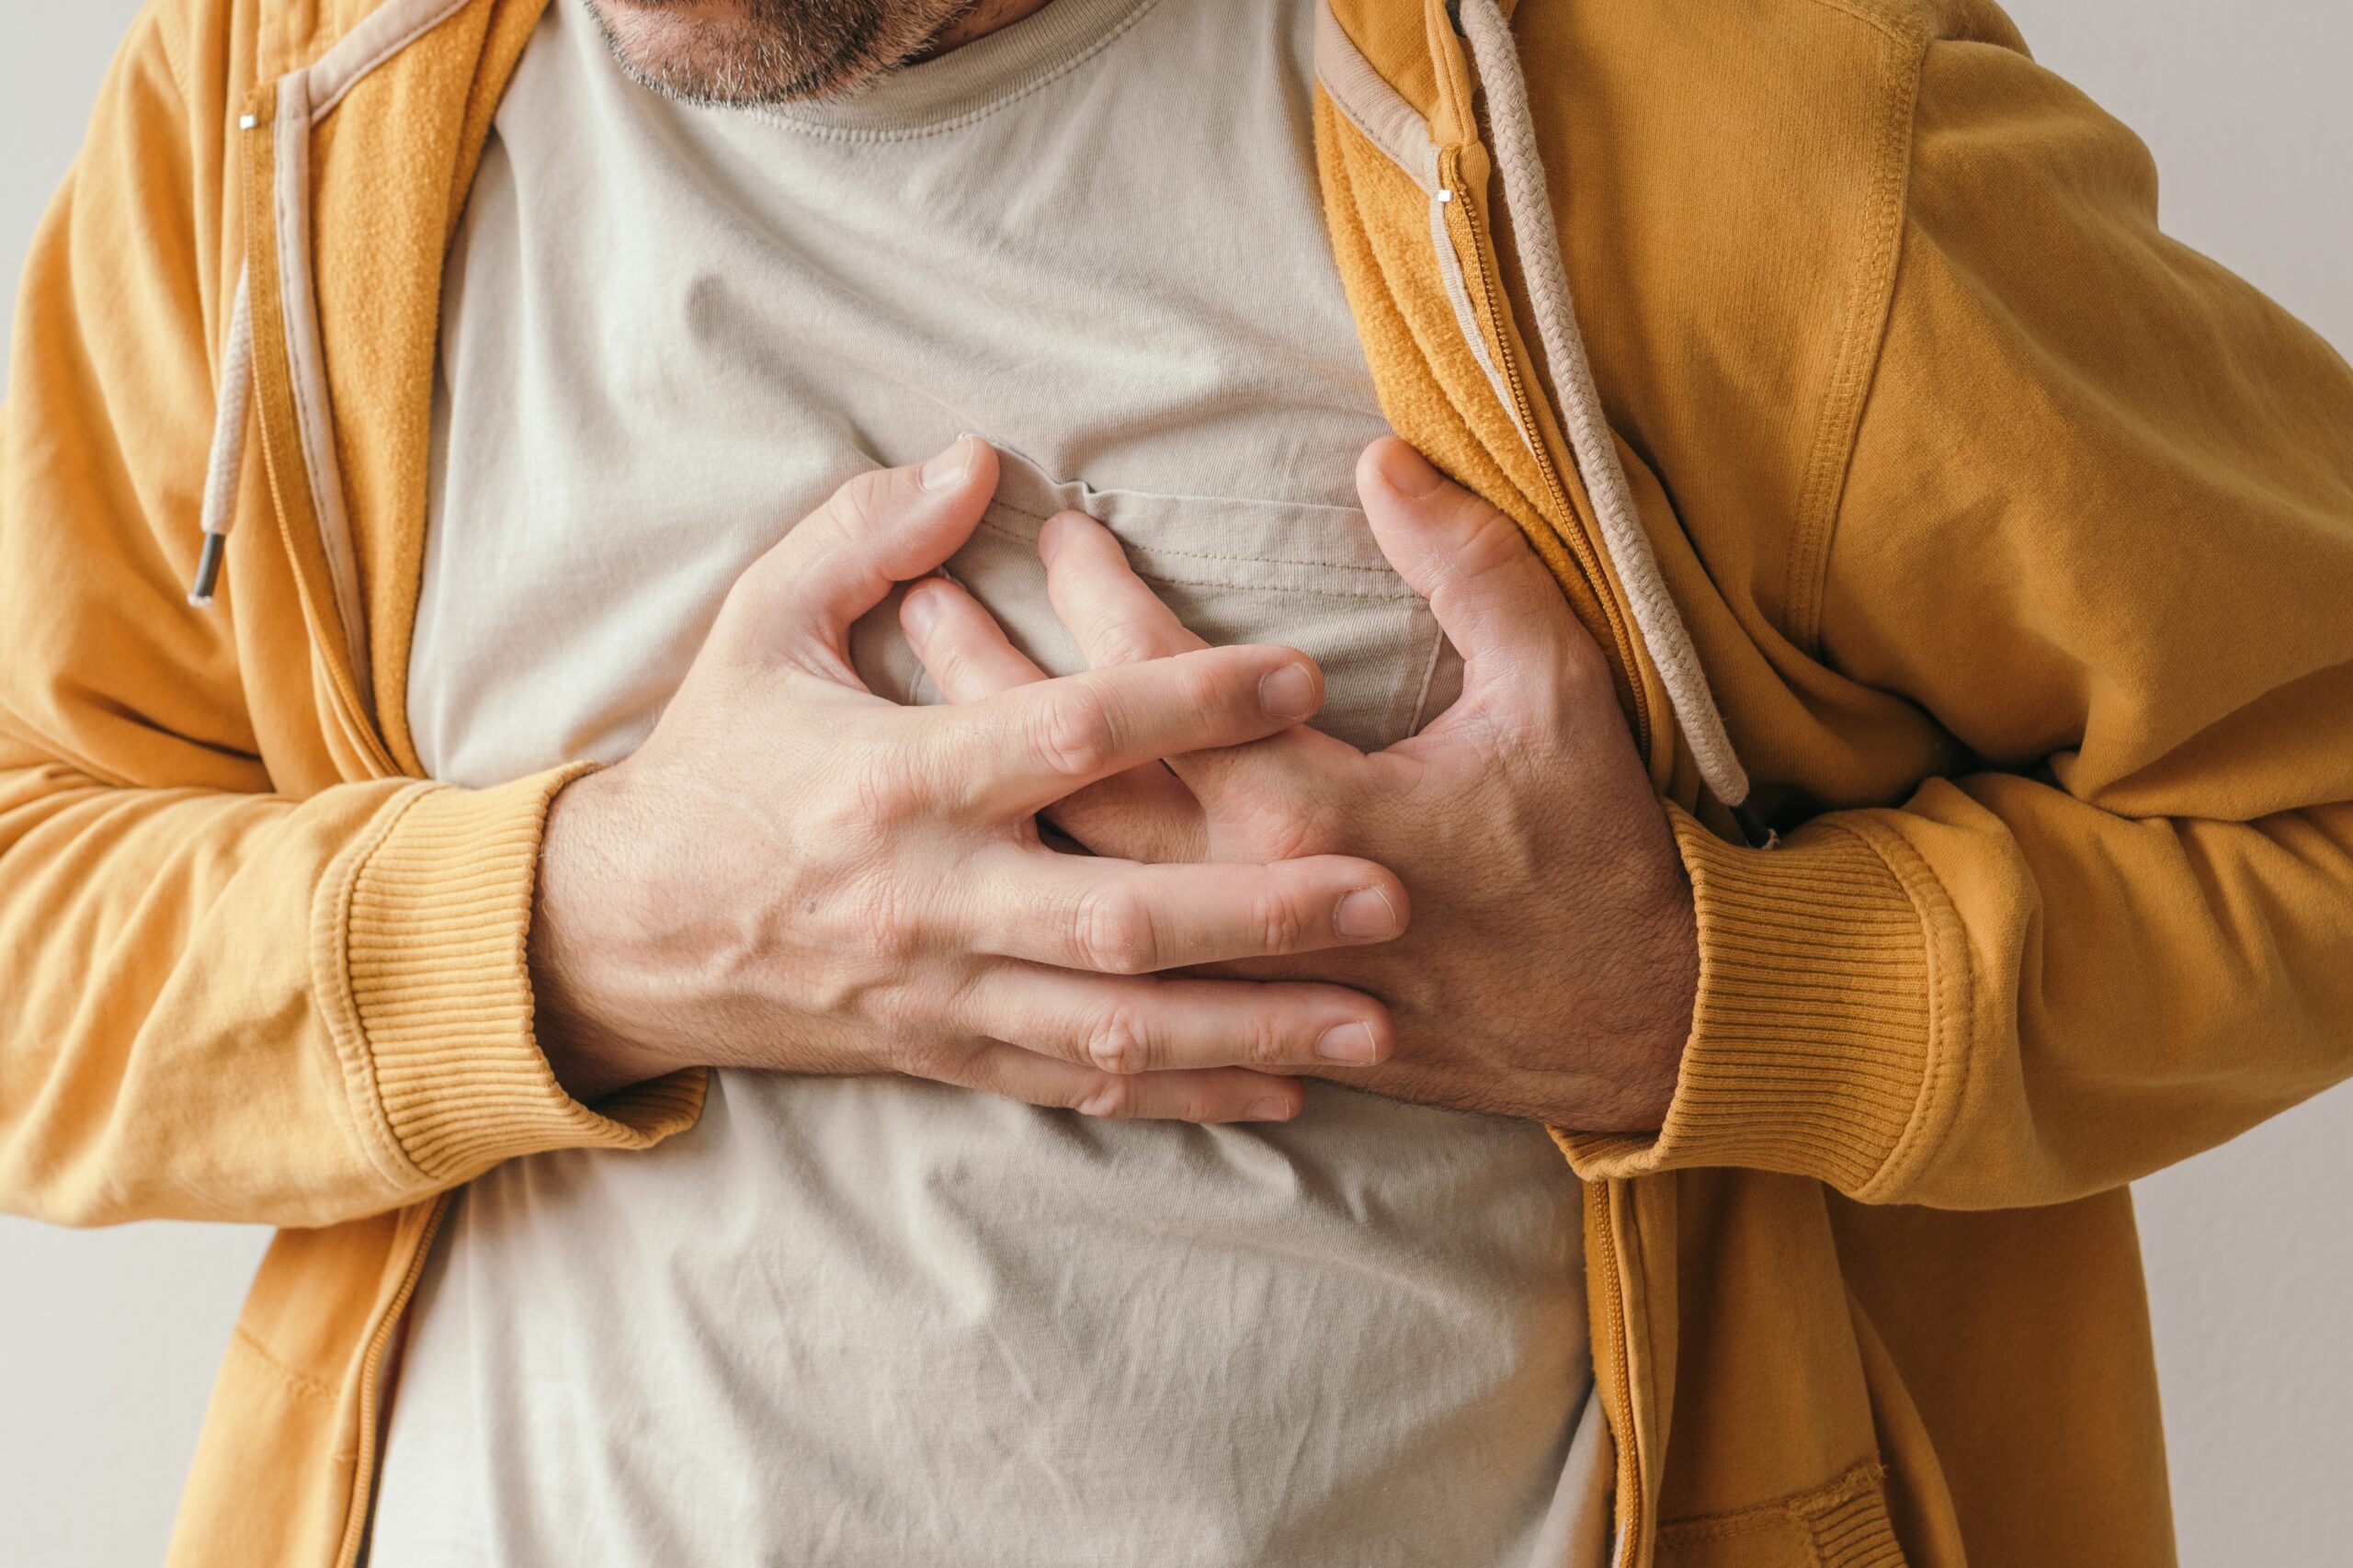 Pulmonary Embolism: What Is, Causes, Symptoms, and Diagnosis